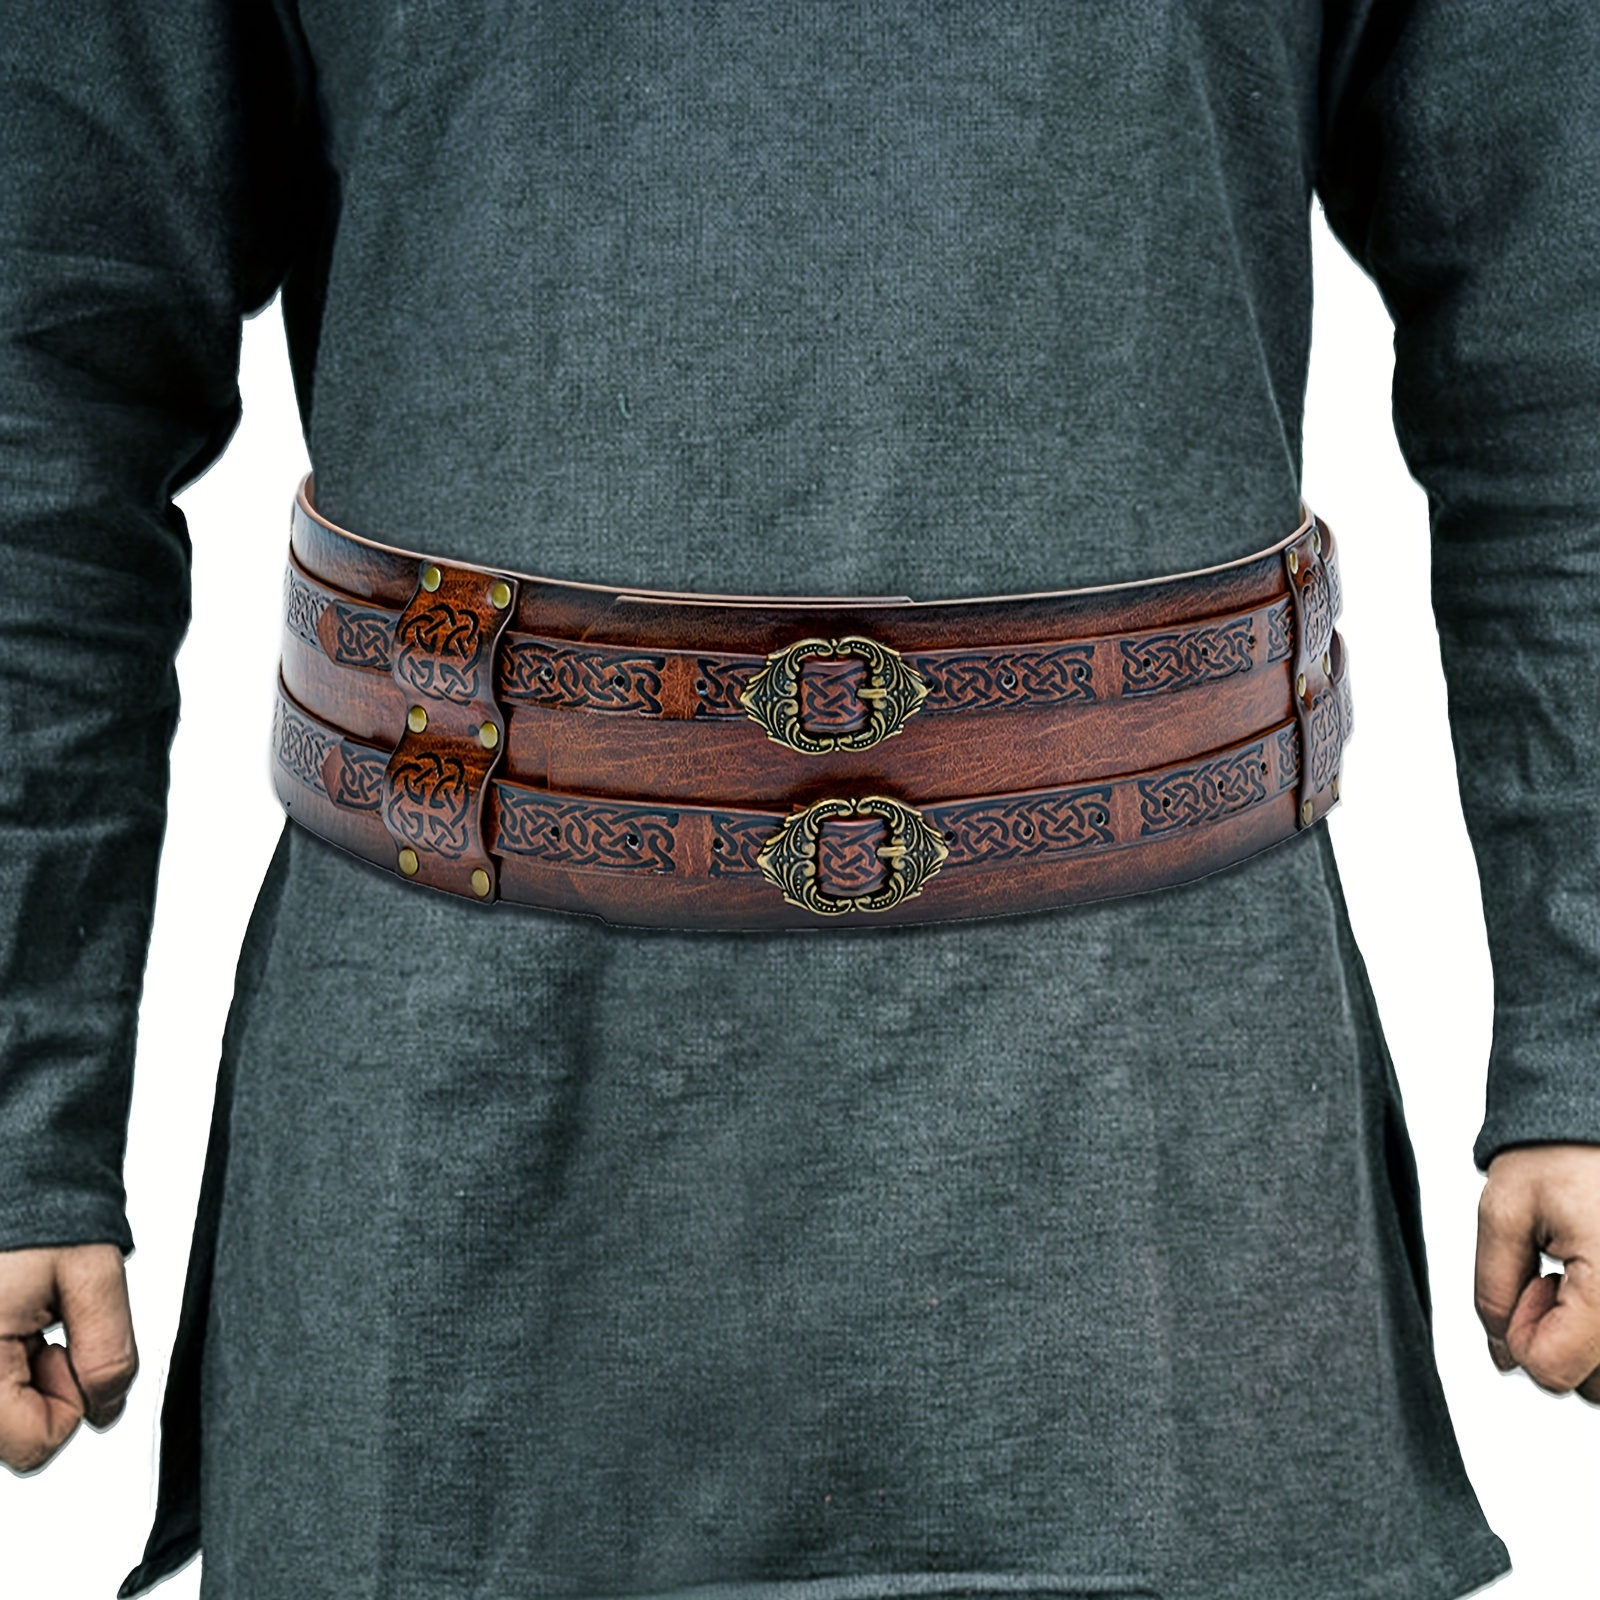 Medieval Viking's Leather Belt with Brass Accents. Available in